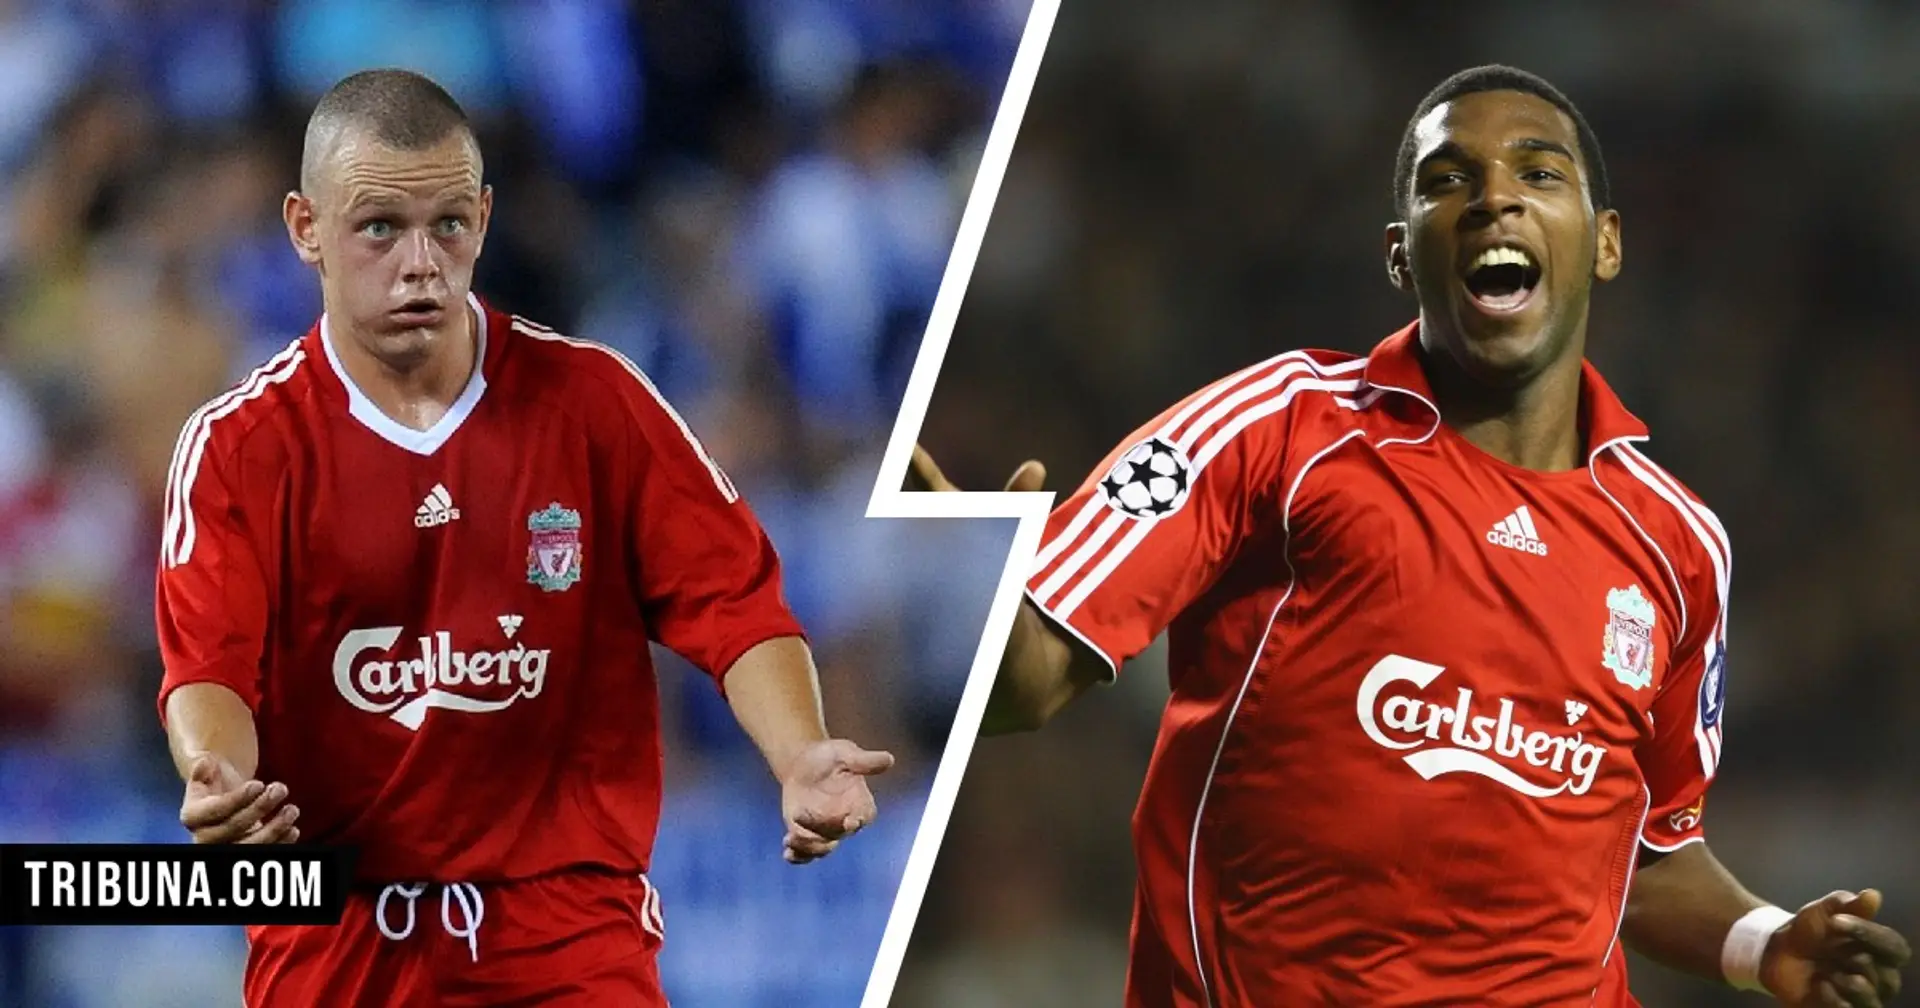 Ryan Babel, Jay Spearing & 12 more: 14 Liverpool players from Rafa Benitez's last squad who still play